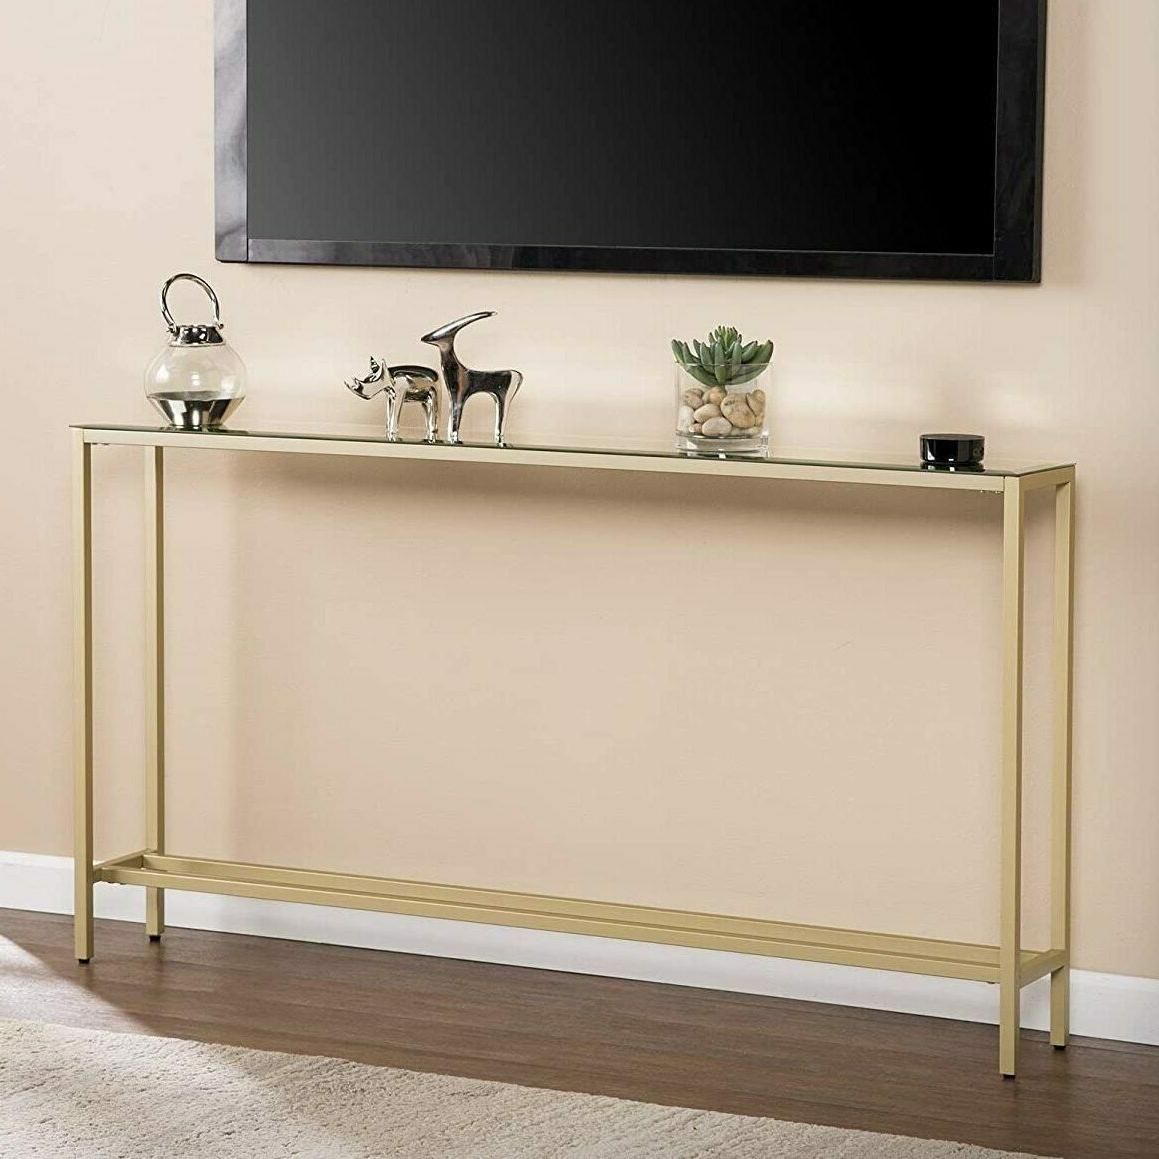 55" Slim Console Table Gold Mirror Top Glam With Regard To Metallic Gold Console Tables (View 5 of 20)